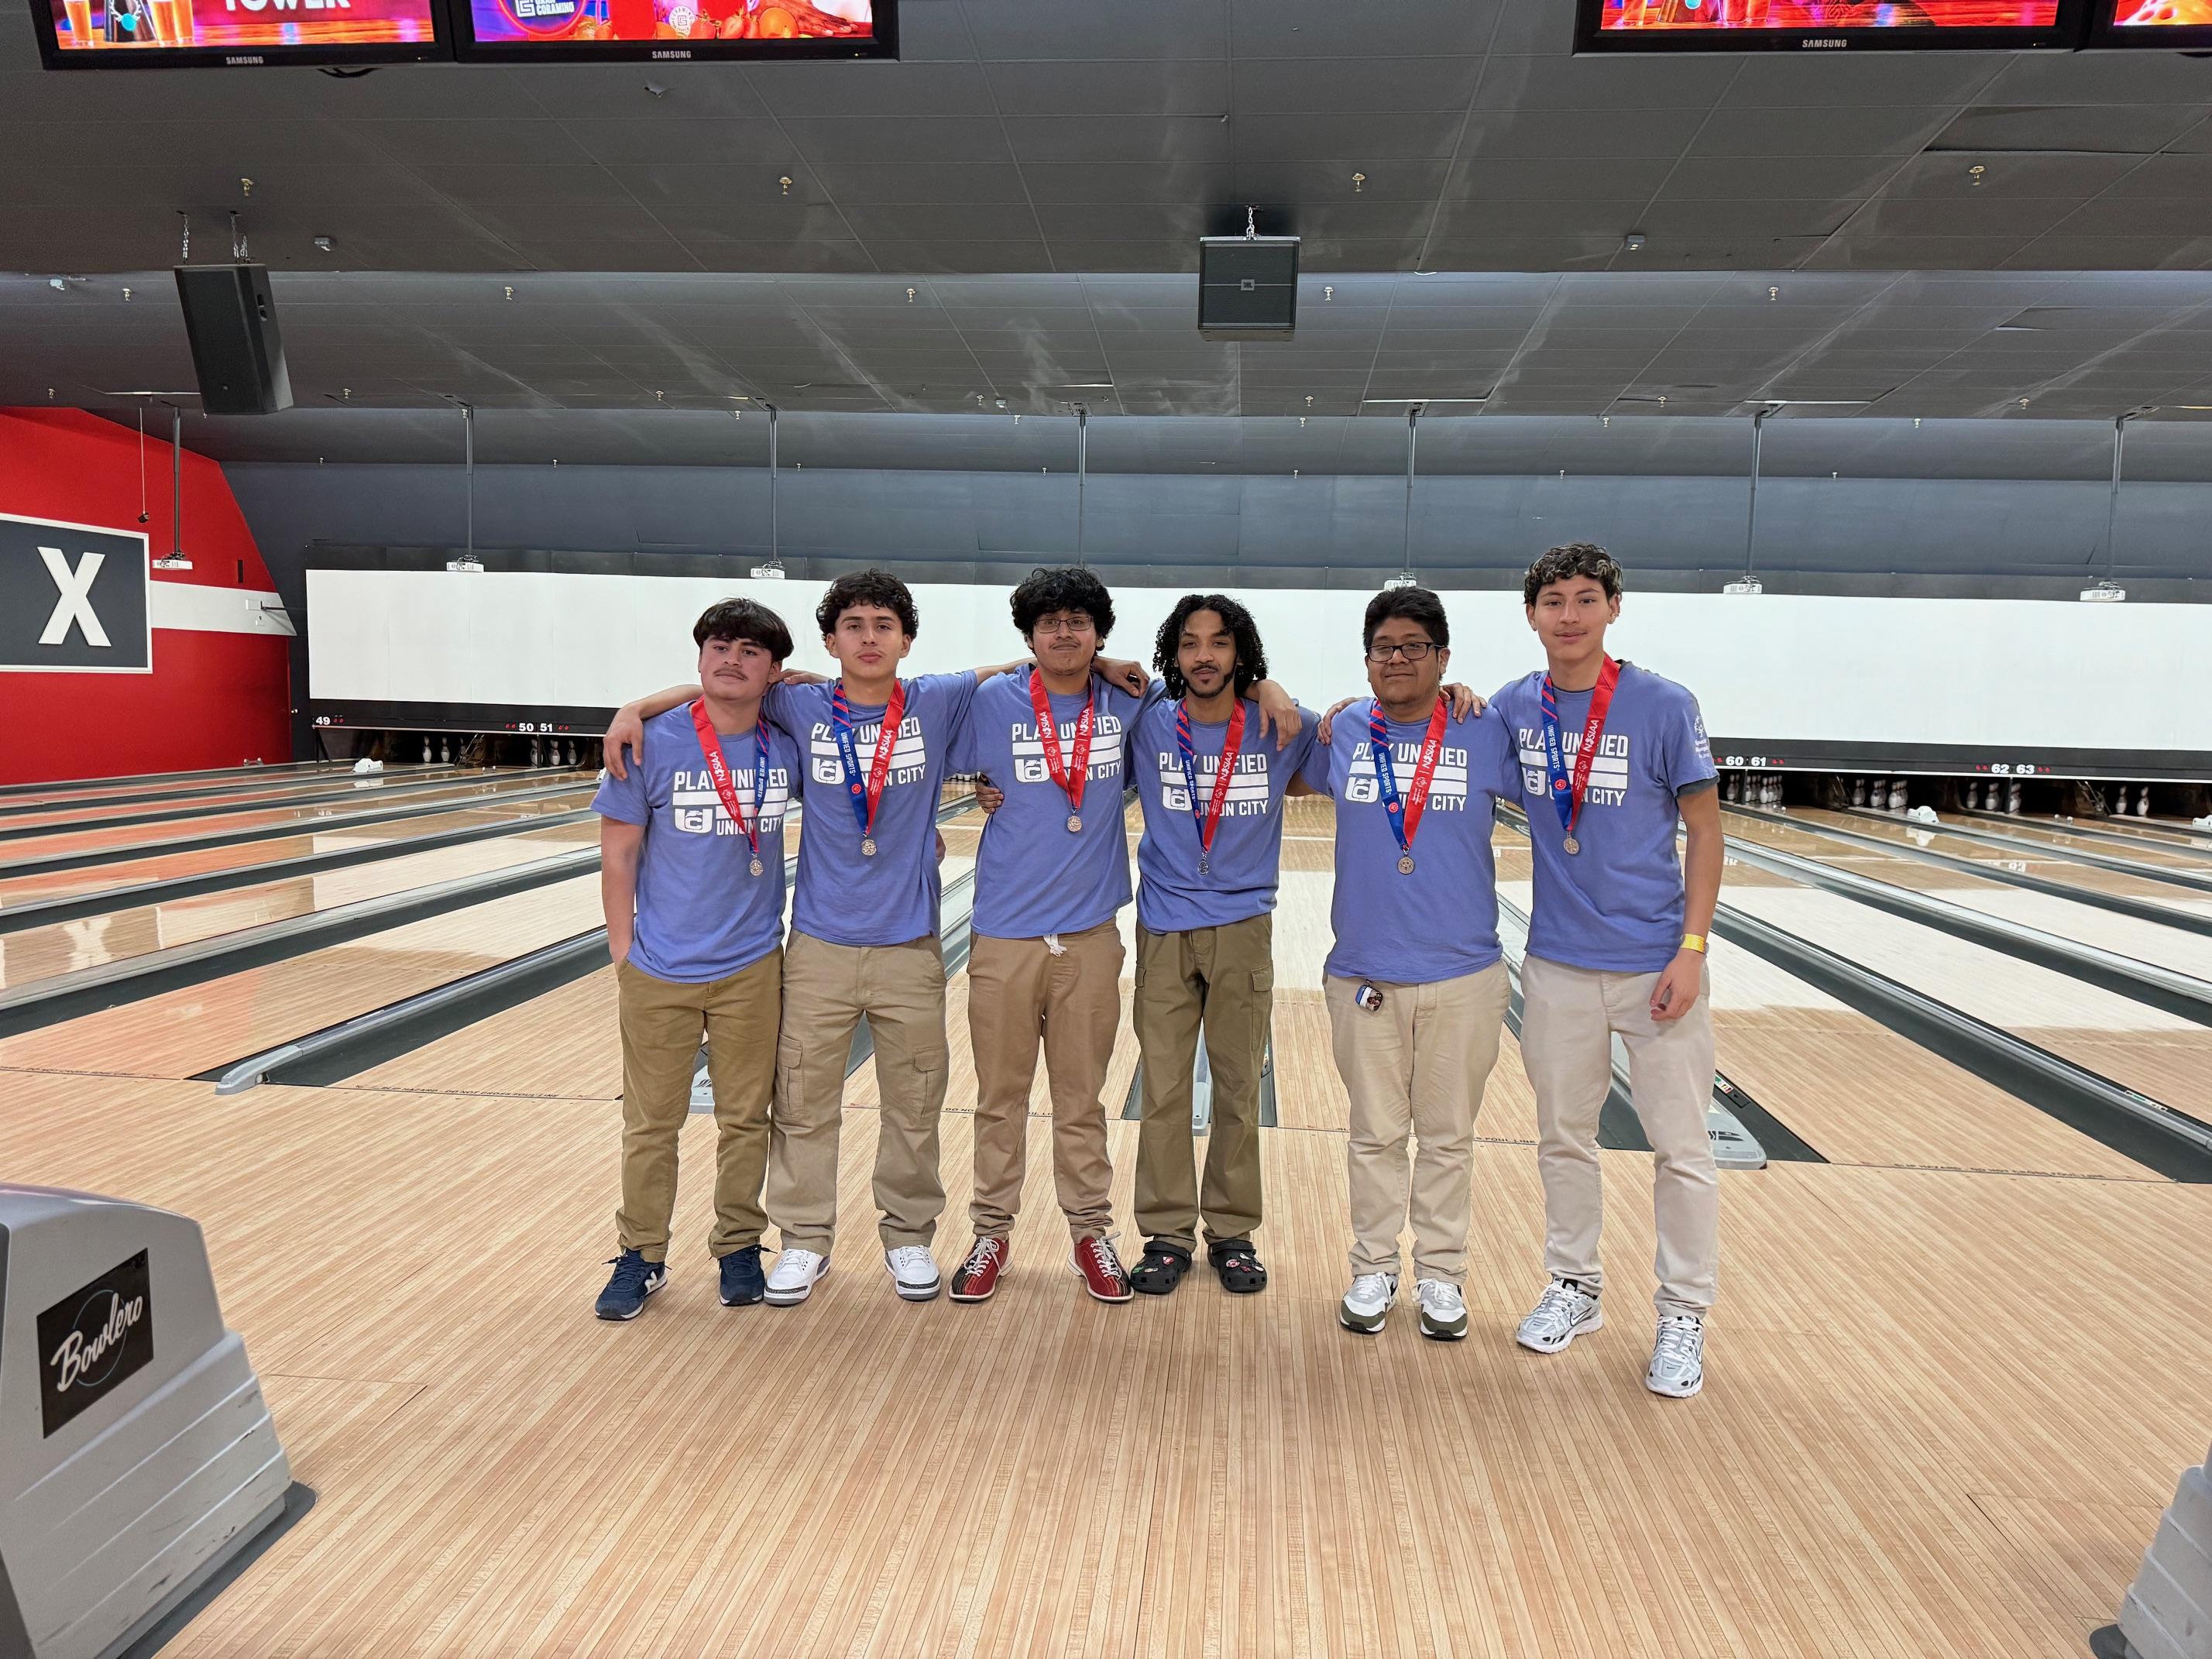 Union City High School Unified Bowling Team